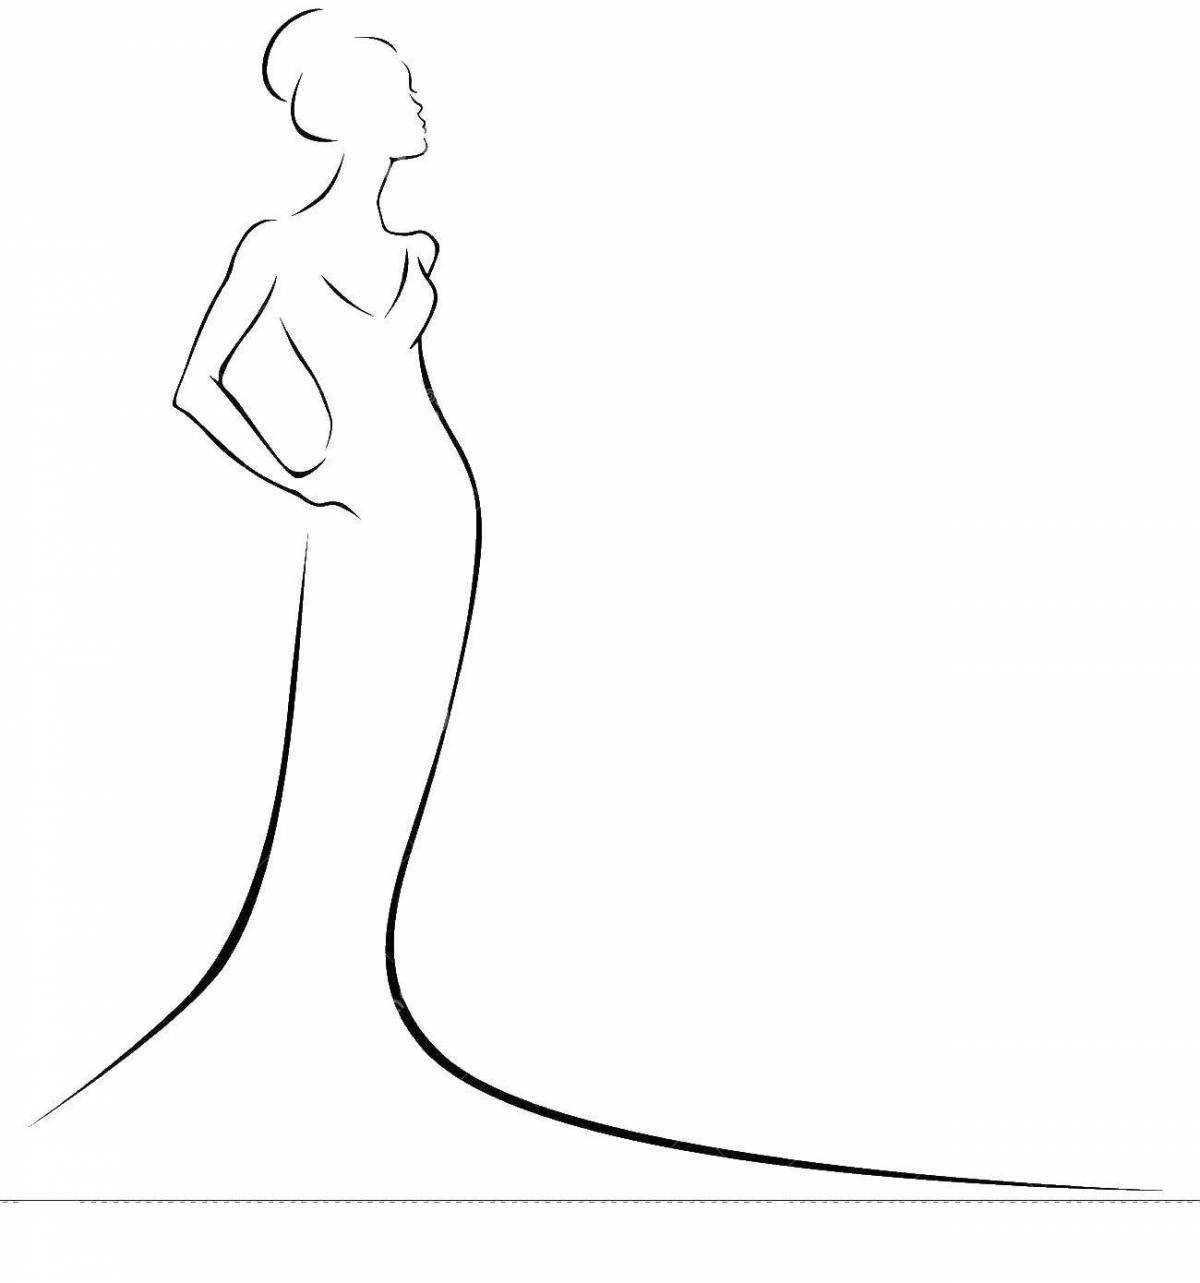 Coloring page serene silhouette of a girl in a dress